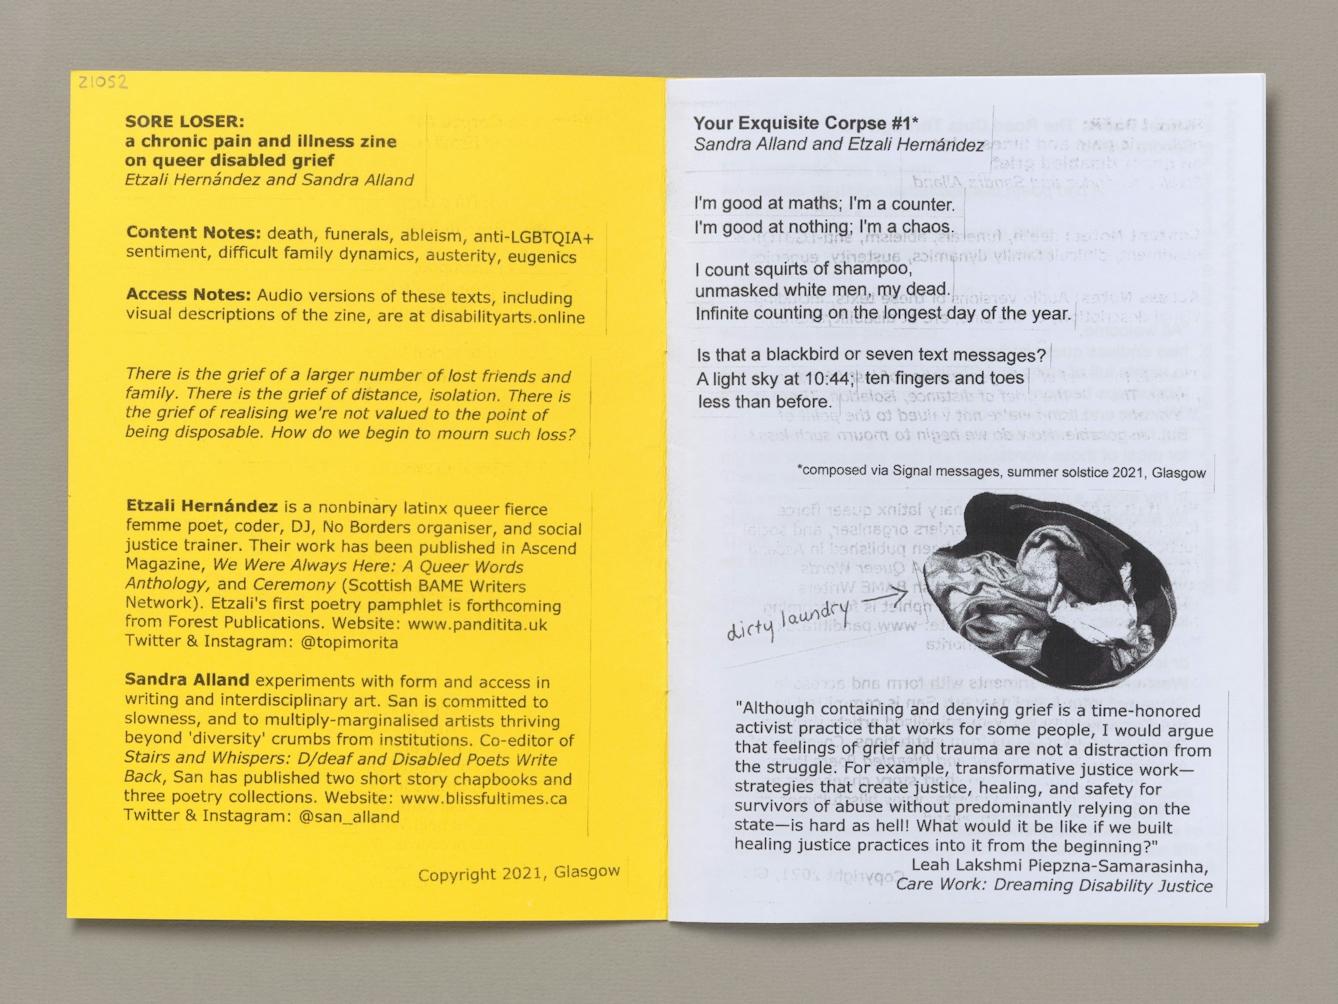 Double page spread from the zine 'Sore loser: a chronic pain and illness zine on queer disabled grief" by Etzali Hernandez and Sandra Alland. On the left side is text containing content and access notes and author biographies for the two zine-makers. The top of the right side  of the page is a cut and pasted poem entitled 'Your Exquisite Corpse #1*', with the authors' names Sandra Alland and Etzali Hernandez in italic underneath. The text of the poem is formatted in three verses. Verse one: "I'm good at maths; I'm a counter. / I'm good at nothing: I'm a chaos. 
Verse two: "I count squirts of shampoo, / unmasked white men, my dead. / Infinite counting on the longest day of the year."
Verse three: "Is that a blackbird or seven text messages? / A light sky at 10:44; ten fingers and toes less than before."
Below the poem is an asterisk linking back to the title and the text: "composed via Signal messages, summer solstice 2021. Glasgow".

Below the poem is a cut out from a black and white photo of a bundle of clothes. The words "dirty laundry" are written in handwriting, with an arrow pointing to the picture.

The bottom third of the page contains a pasted, printed quote from the book 'Care Work: Dreaming Disability Justice' by Leah Lakshmi Piepzna-Samarasinha. The text says: "Although containing and denying grief is a time-honored activist practice that works for some people, I would argue that feelings of grief and trauma are not a distraction from the struggle. For example, transformative justice work—strategies that create justice, healing, and safety for survivors of abuse without predominantly relying on the state—is hard as hell! What would it be like if we built healing justice practices into it from the beginning?"